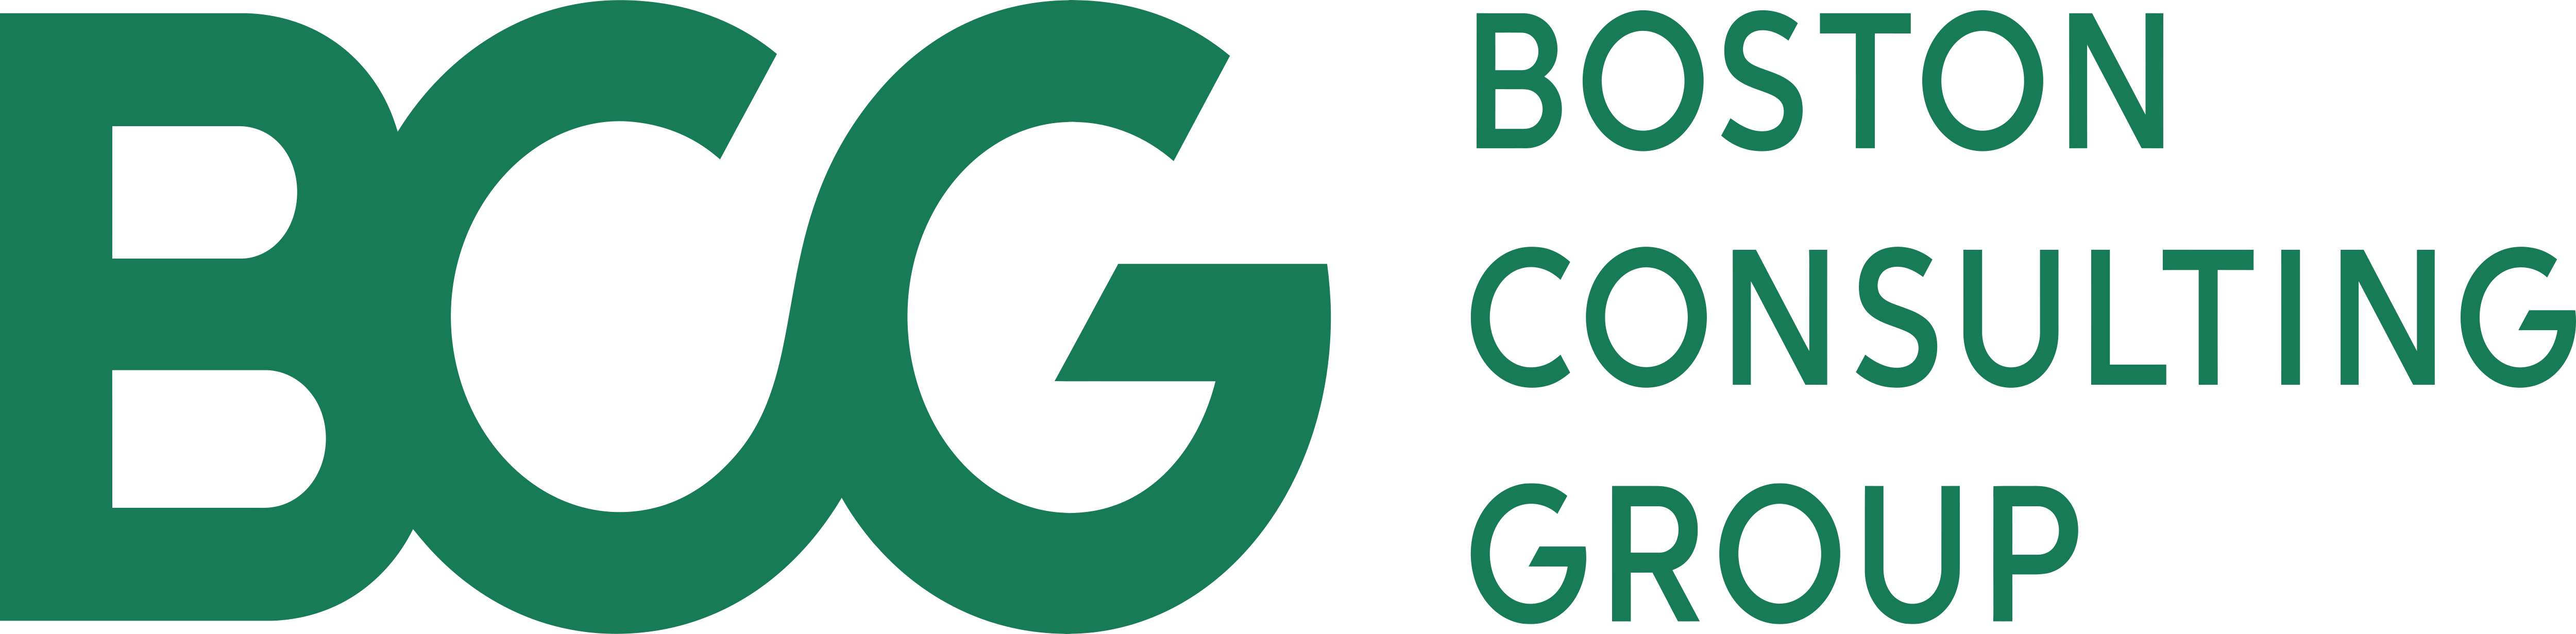 The Boston Consulting Group – Logos Download